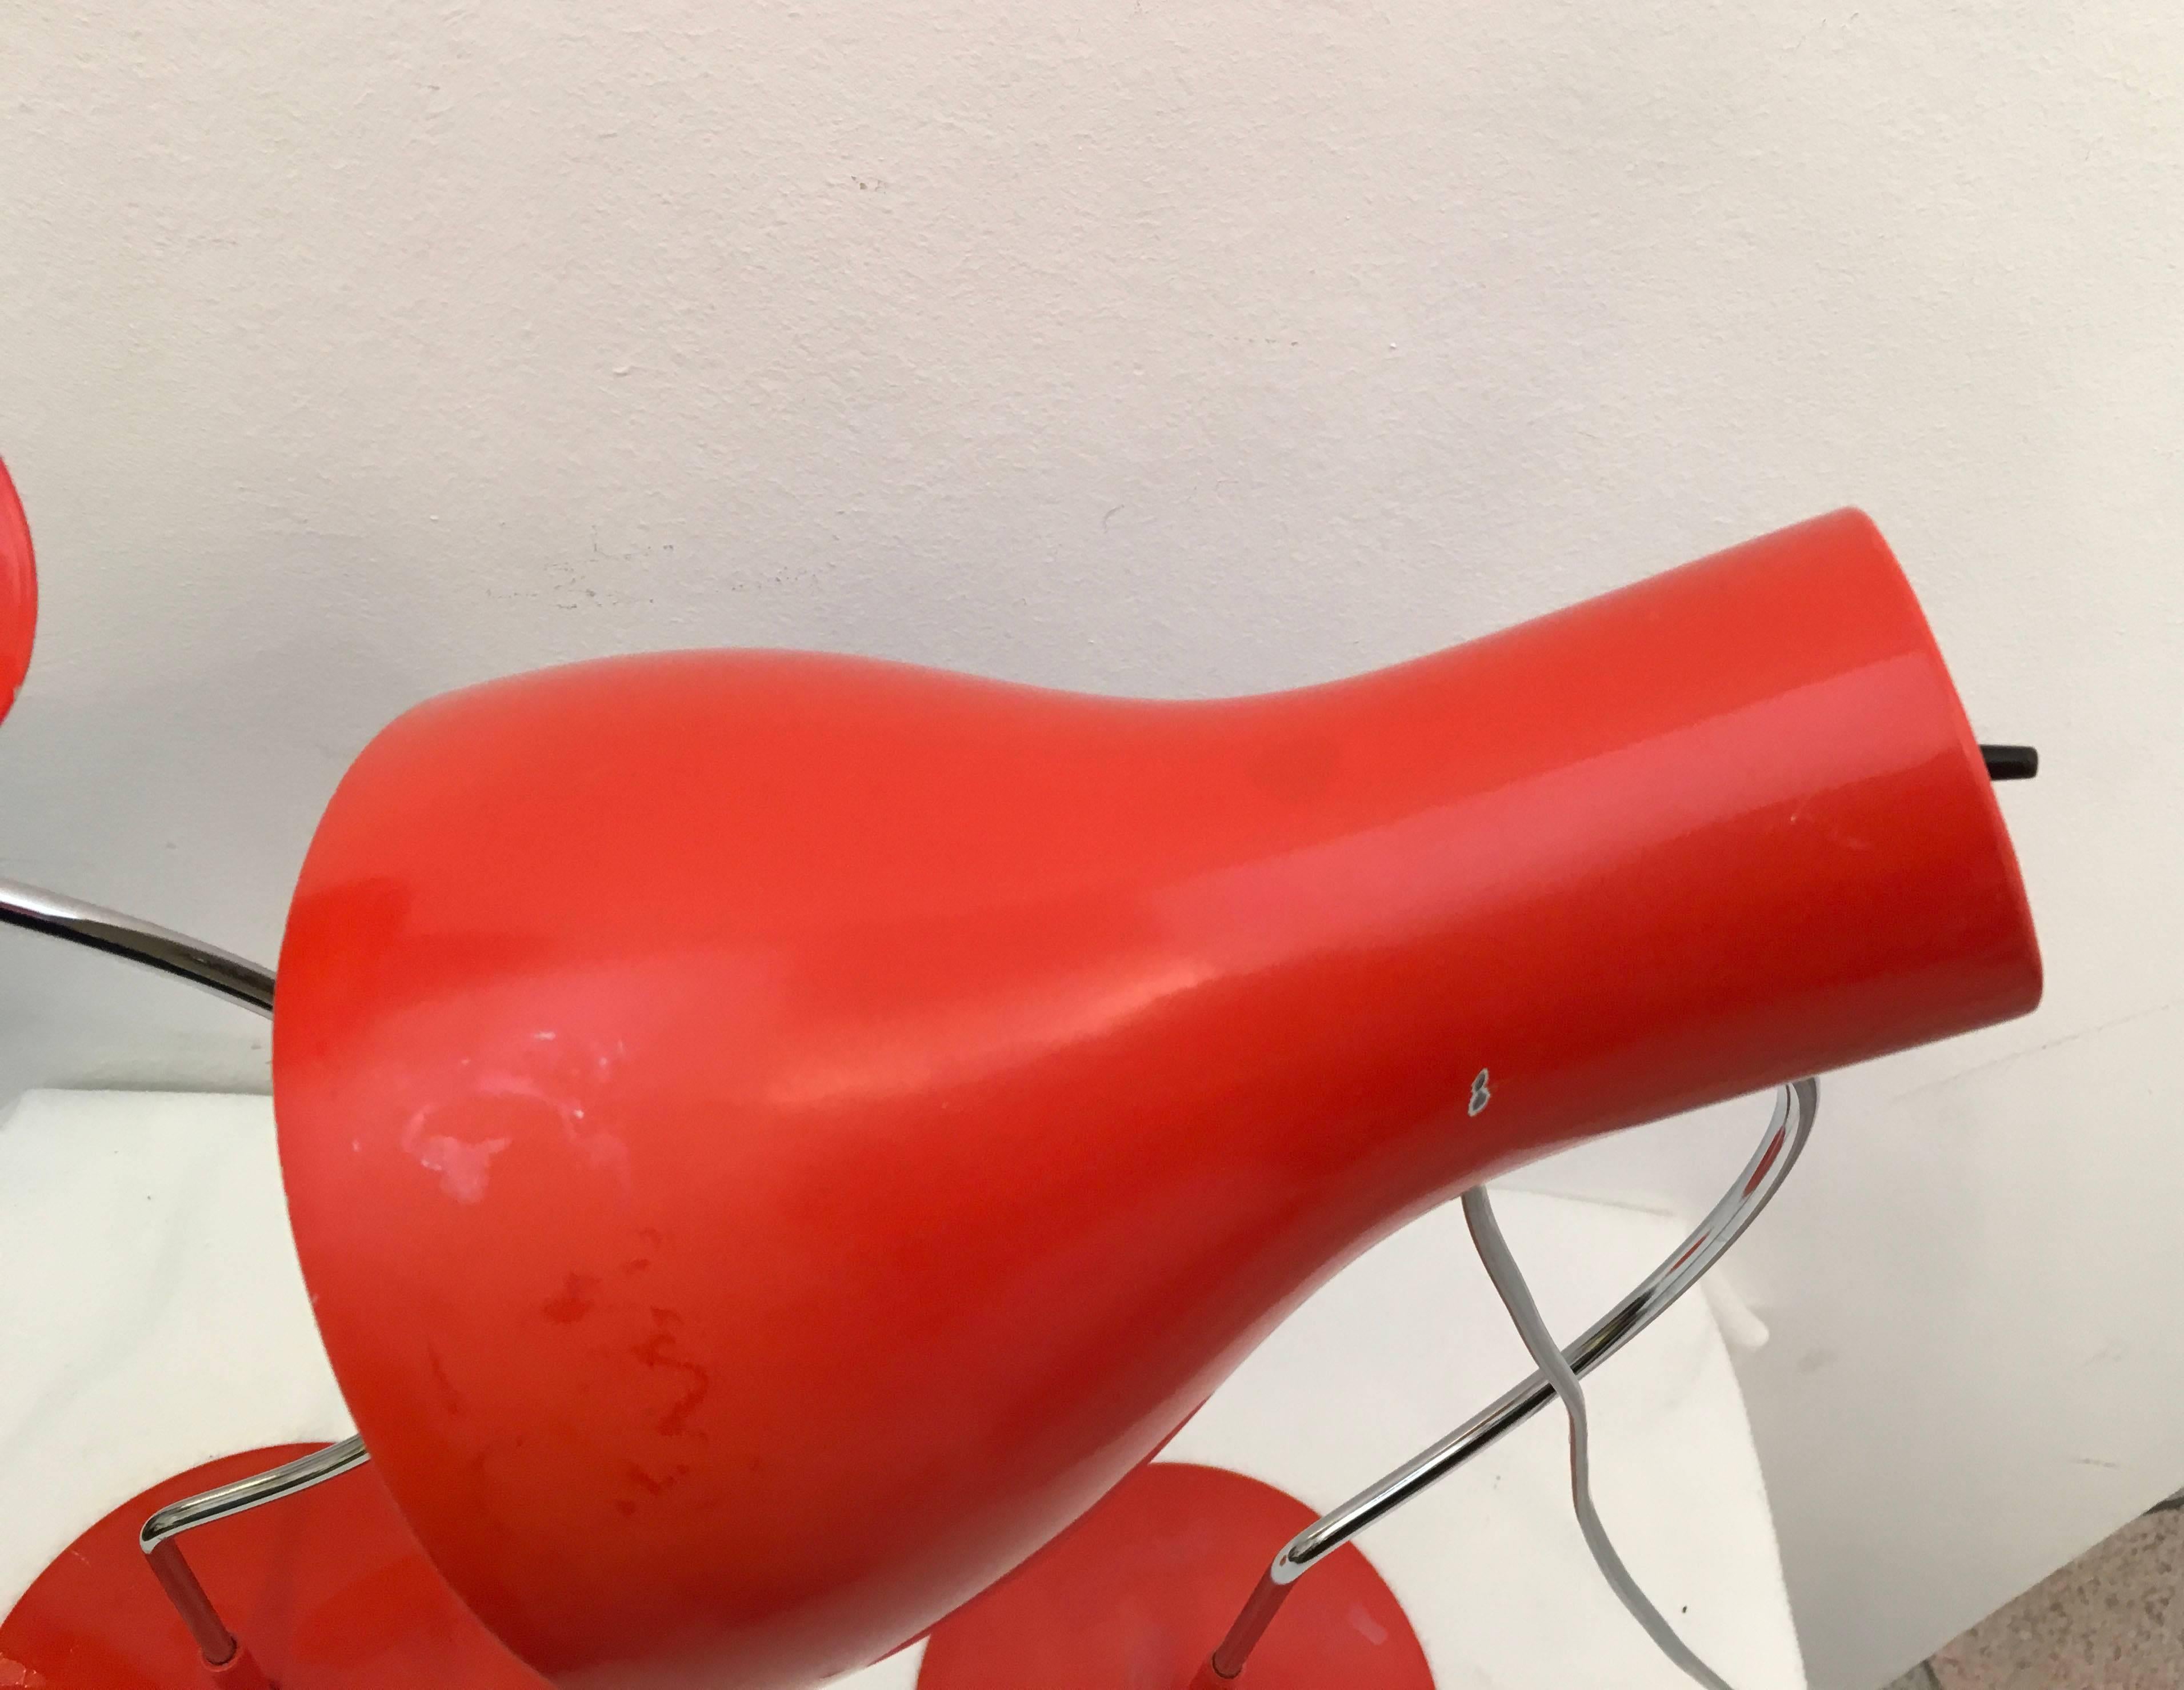 Red Midcentury Table Lamp by Josef Hurka for Napako In Good Condition For Sale In Vienna, AT